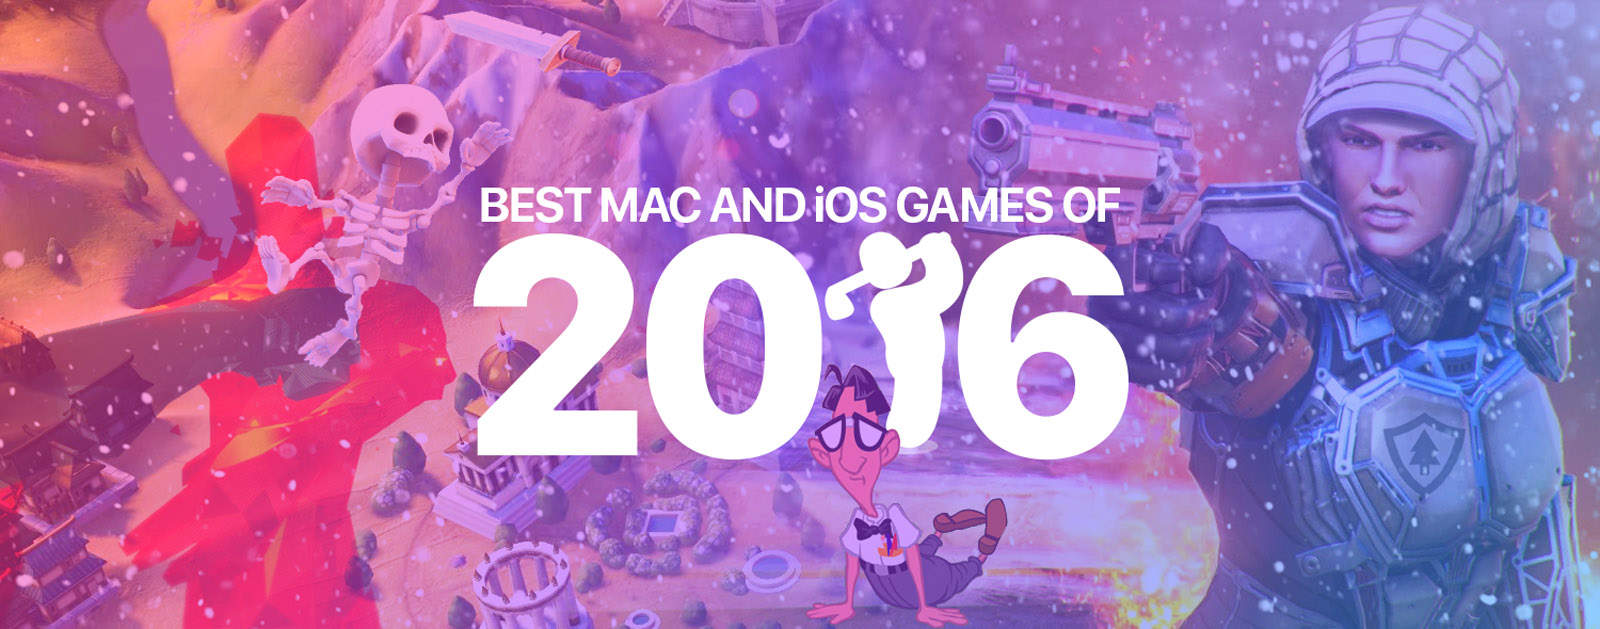 best mac and ios games 2016